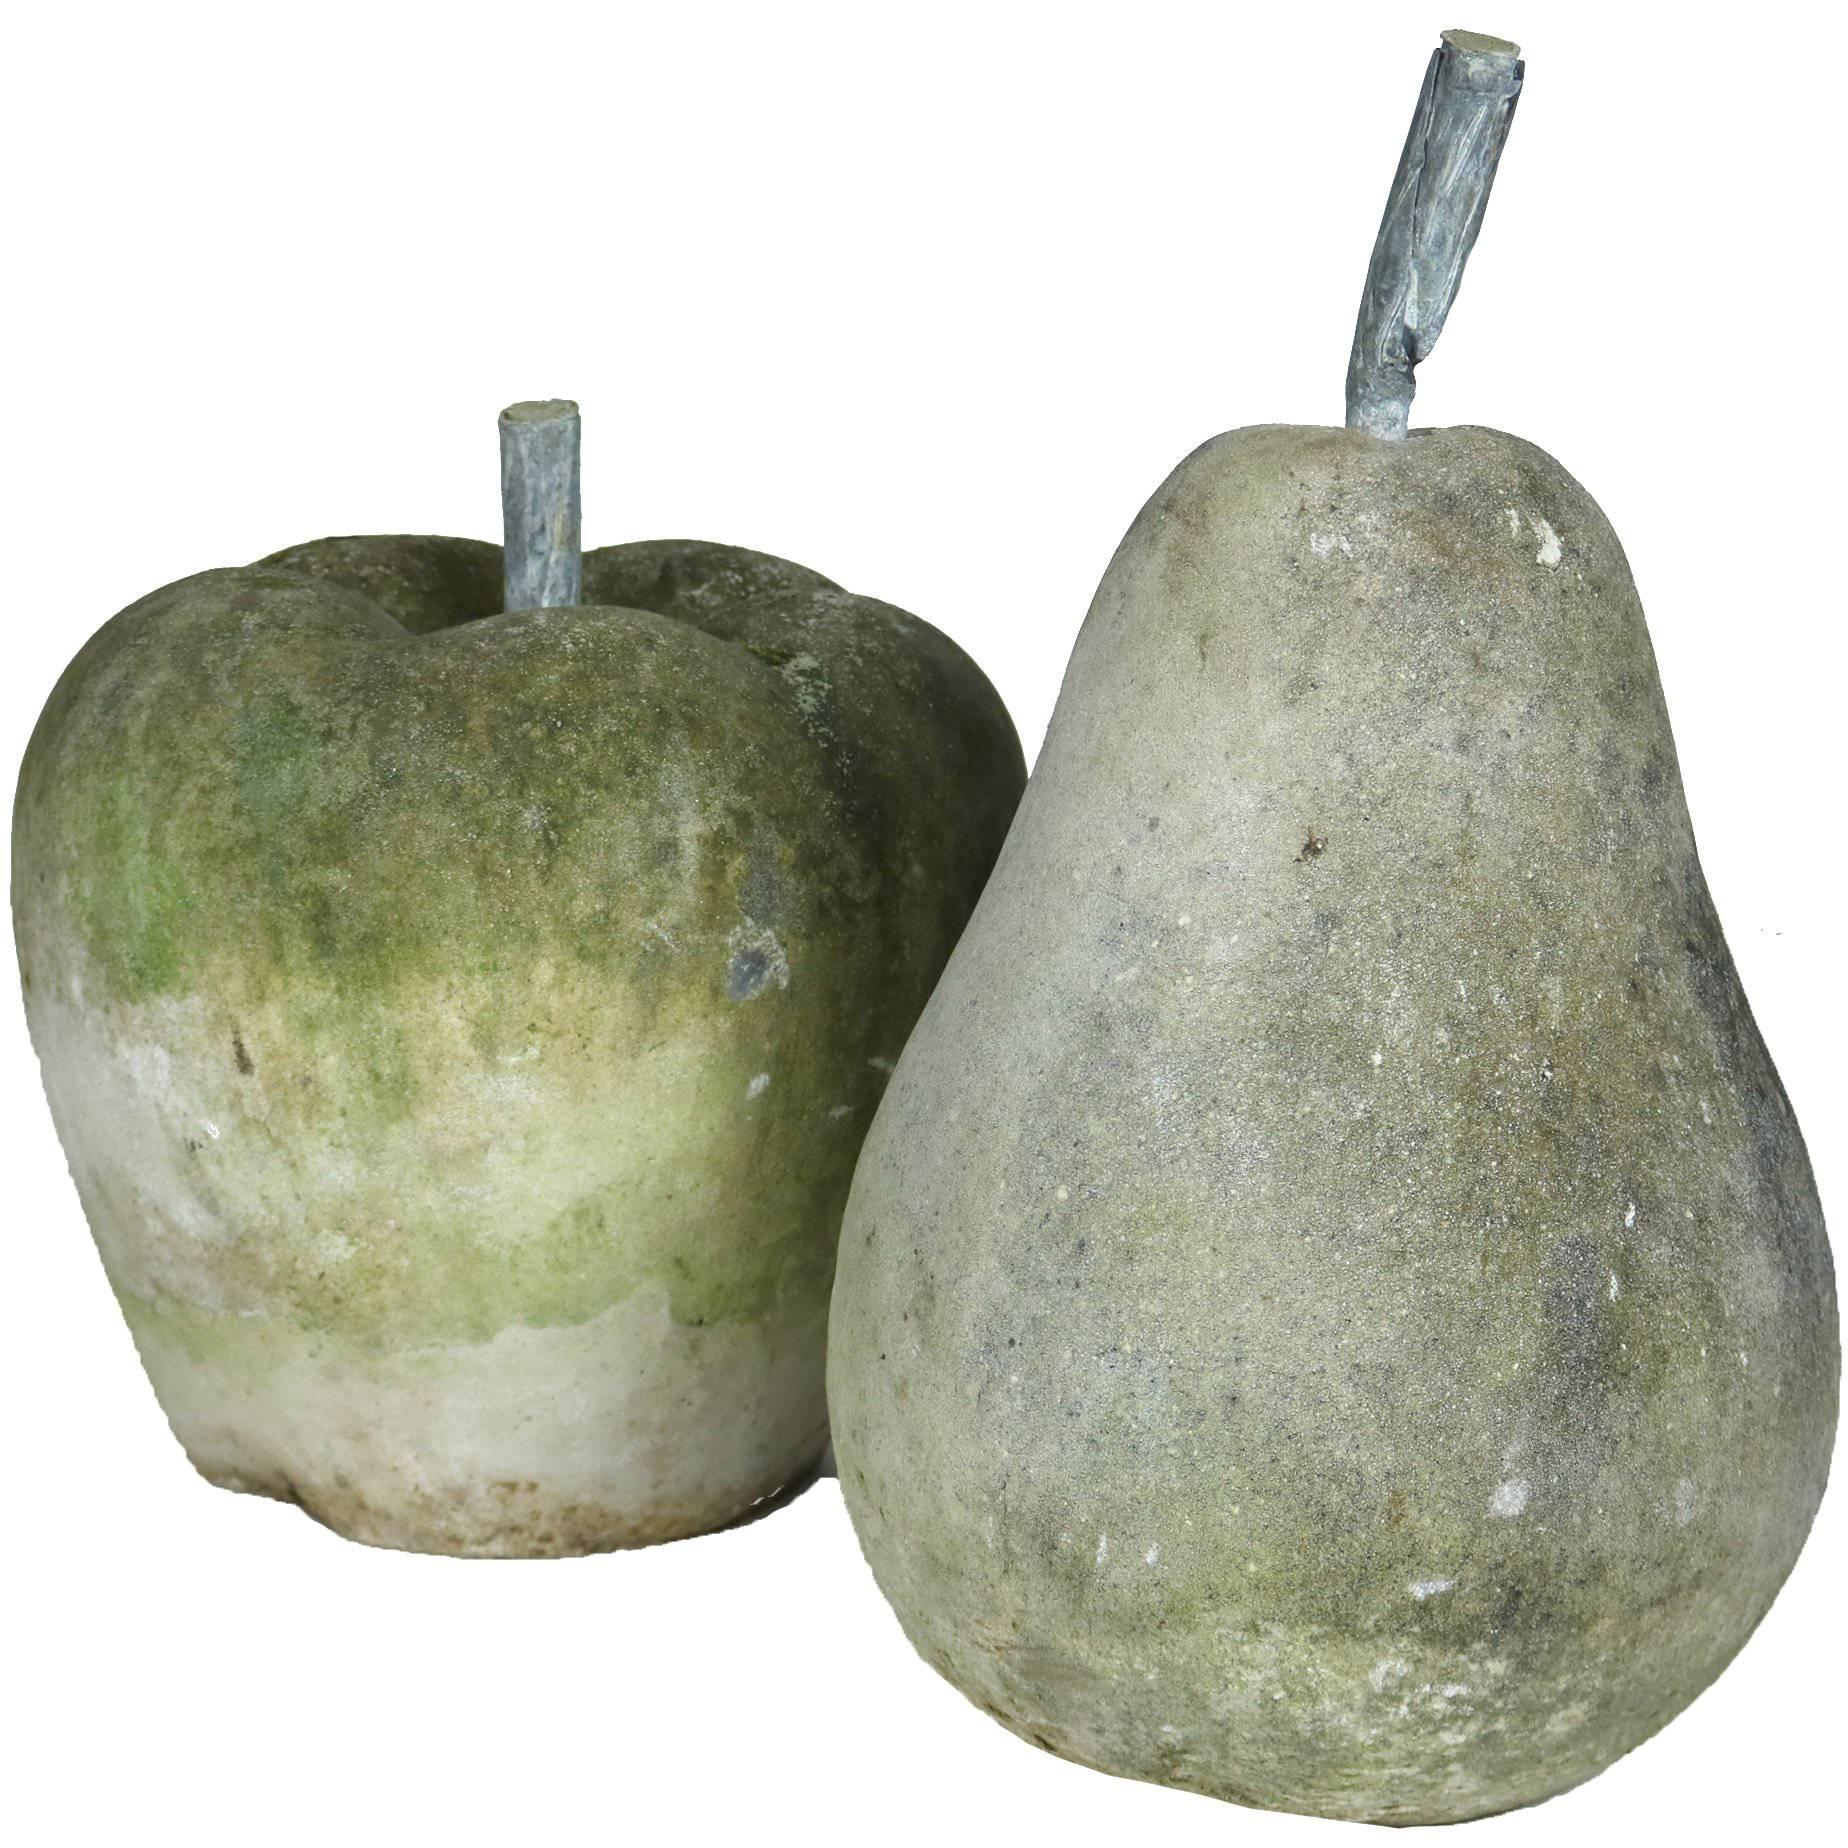 Stone Pear and Apple